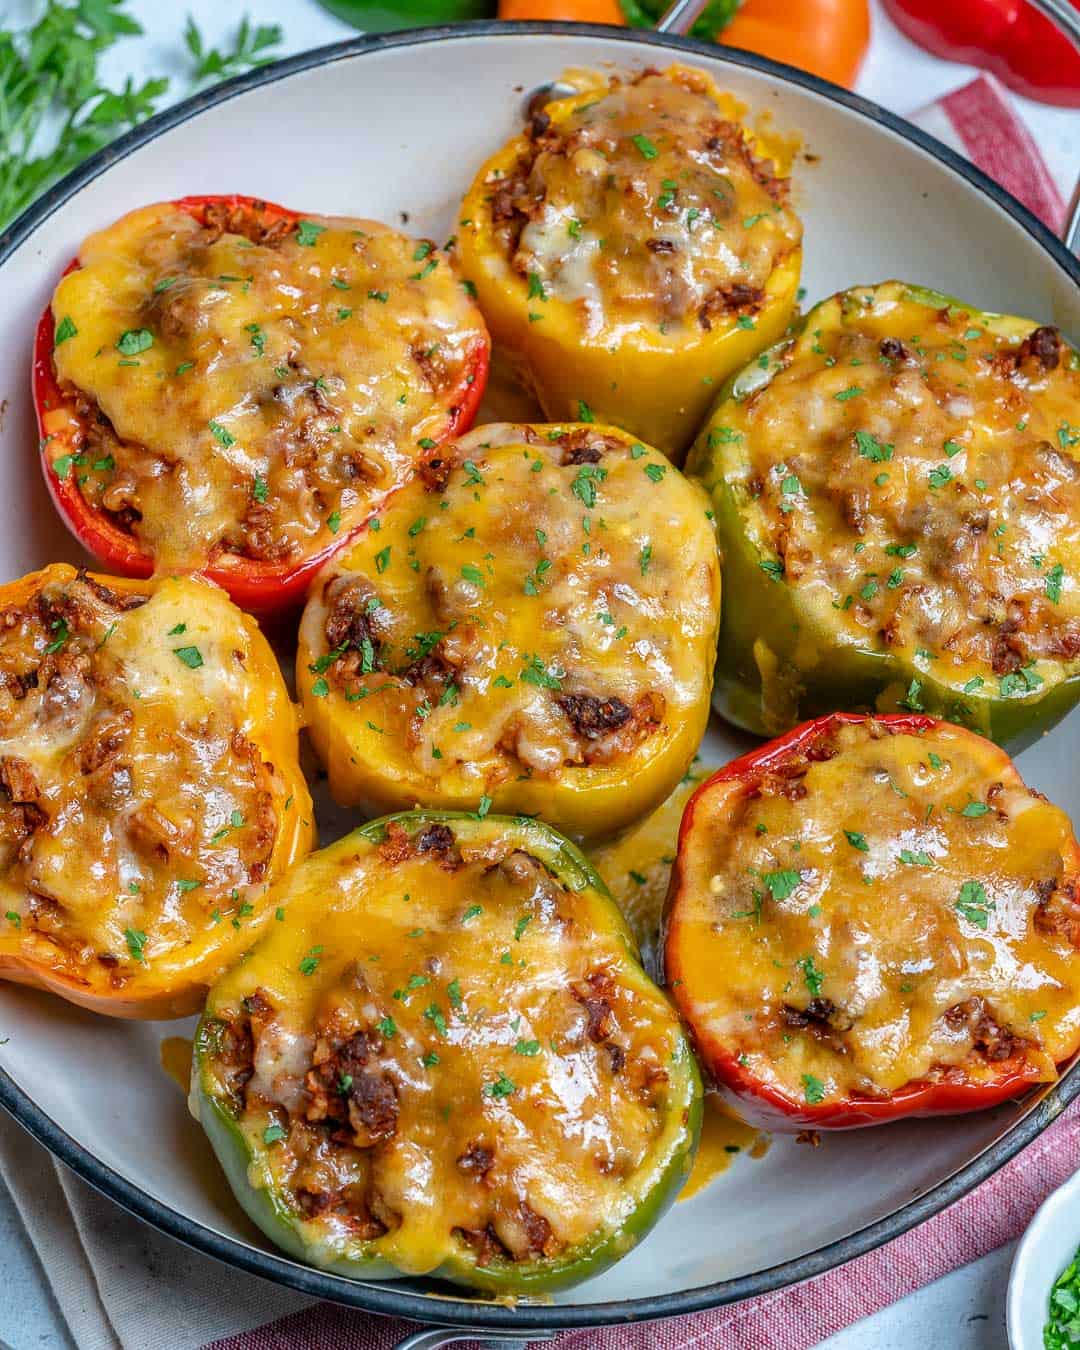 Easy Stuffed Peppers Recipe Healthy Fitness Meals,How Wide Is A Queen Size Bed